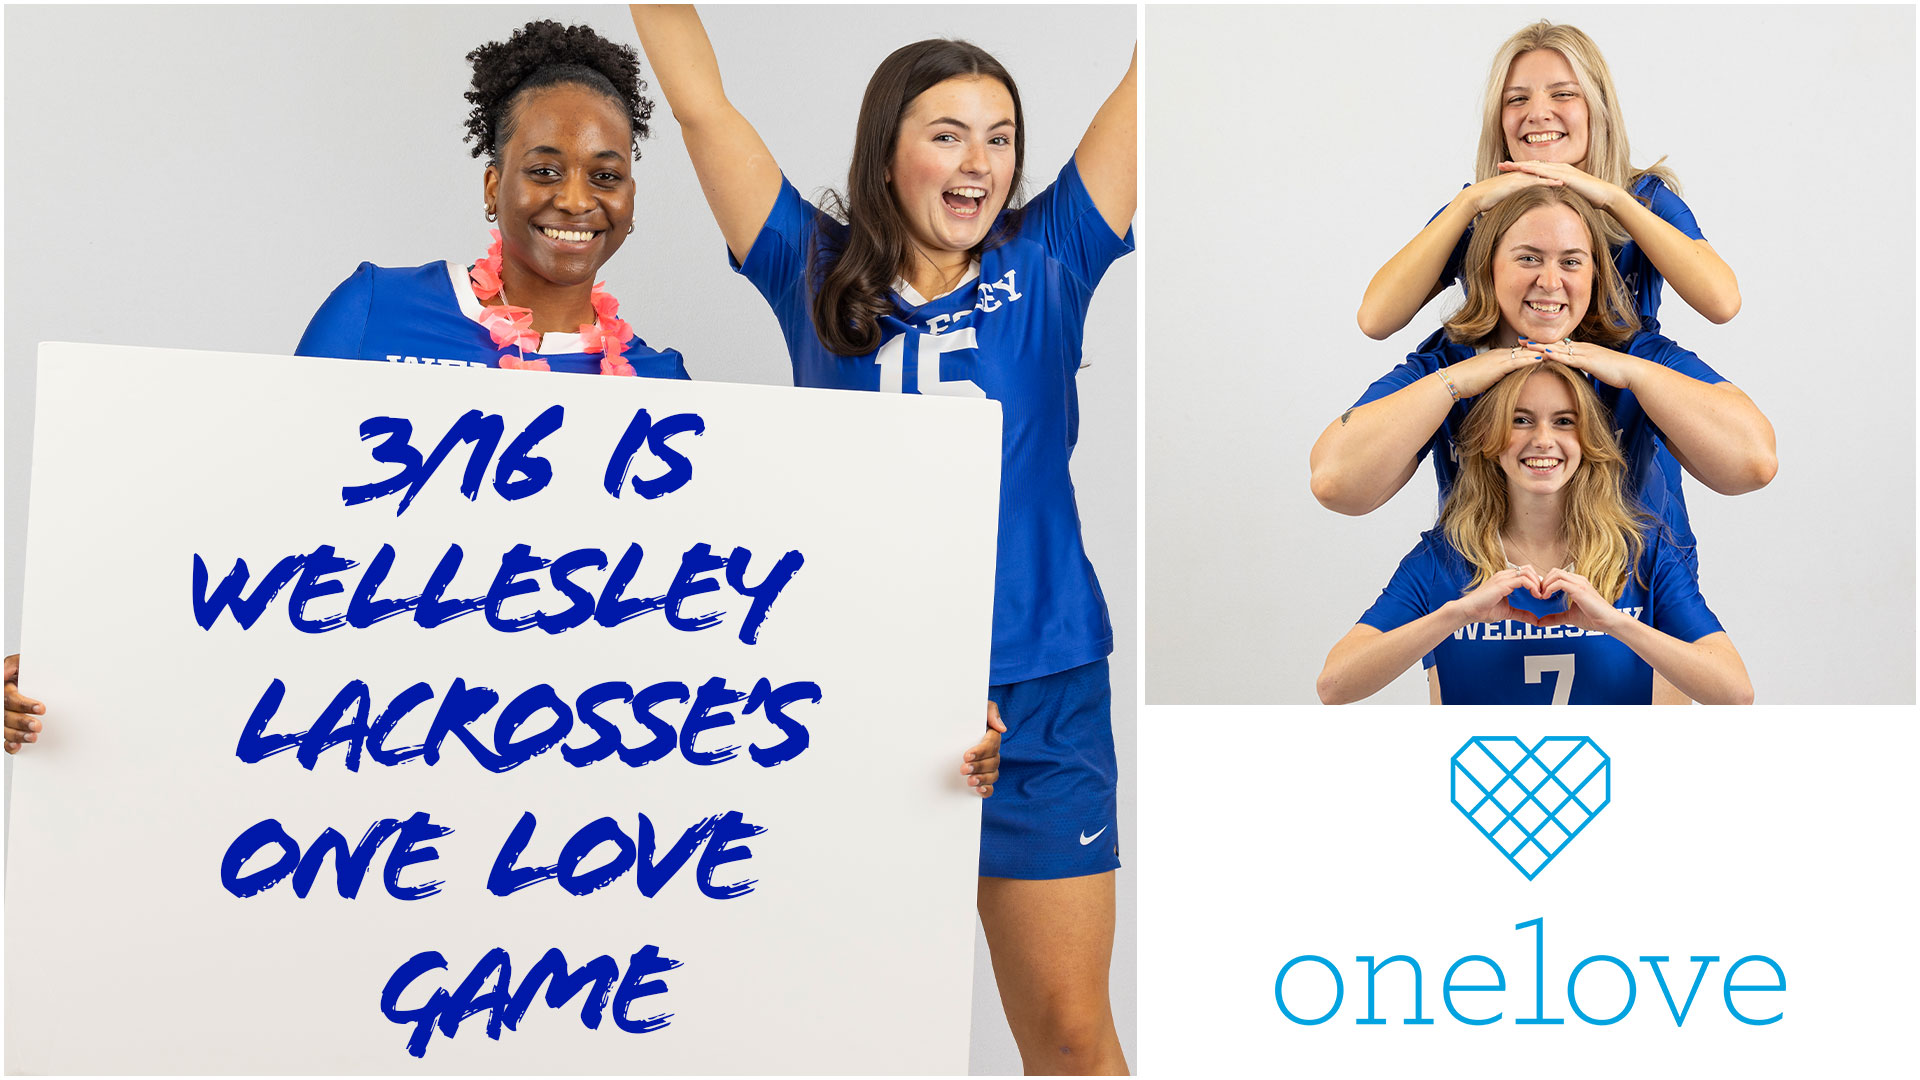 Wellesley lacrosse will host its One Love Game on Saturday, March 16 (Frank Poulin).